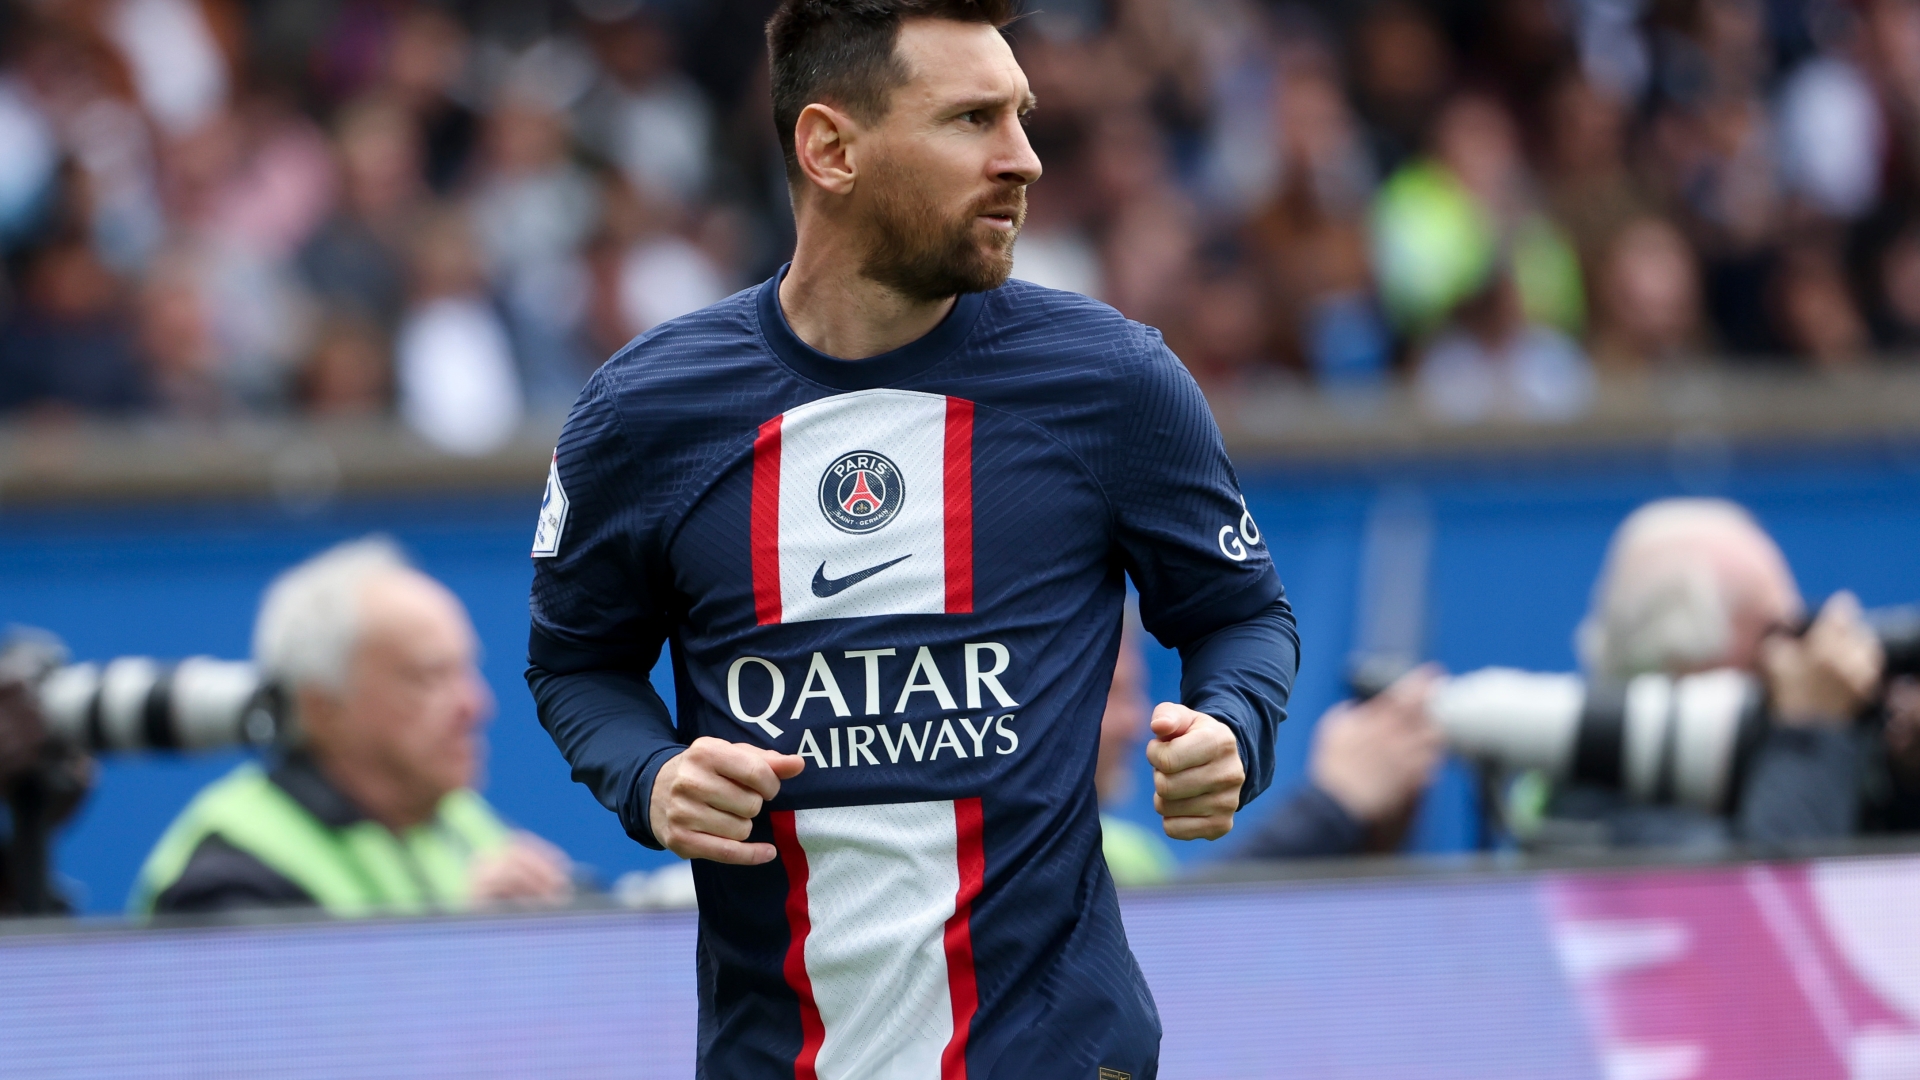 Lionel Messi suspended for two weeks by PSG after unsanctioned trip to Saudi Arabia